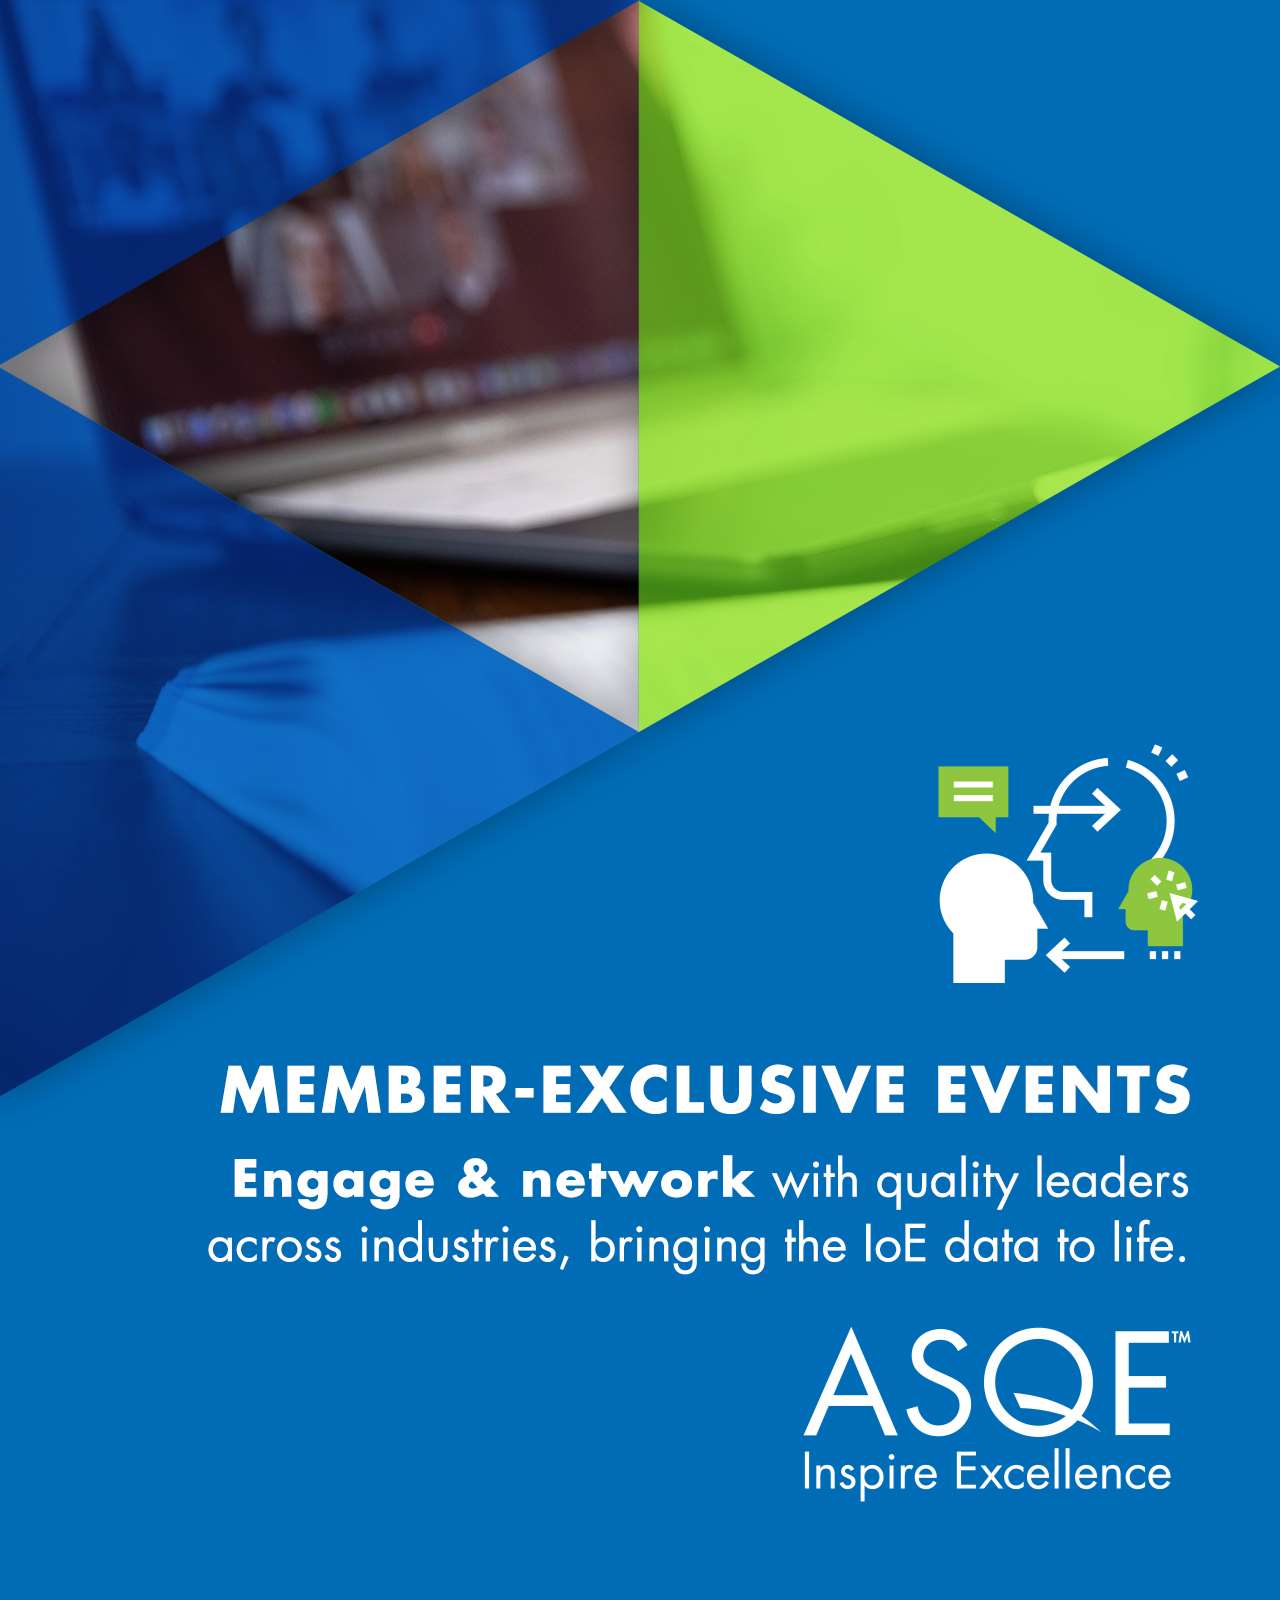 Graphic image with text that reads "Member-Exclusive Events Engage & network with quality leaders across industries, bringing the IoE data to life."